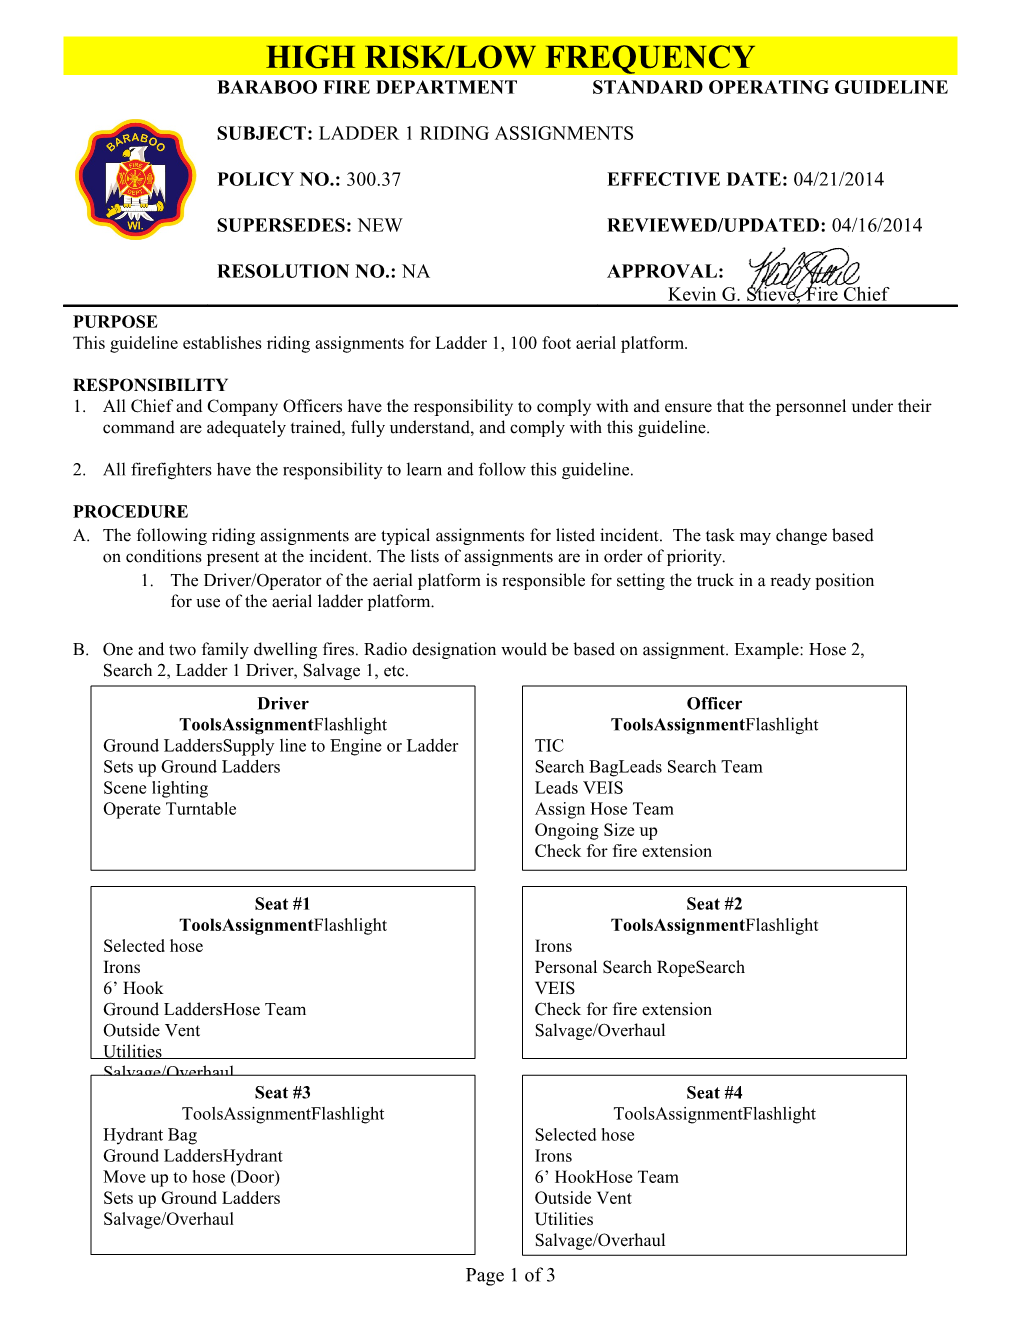 This Guideline Establishes Riding Assignments for Ladder 1, 100 Foot Aerial Platform